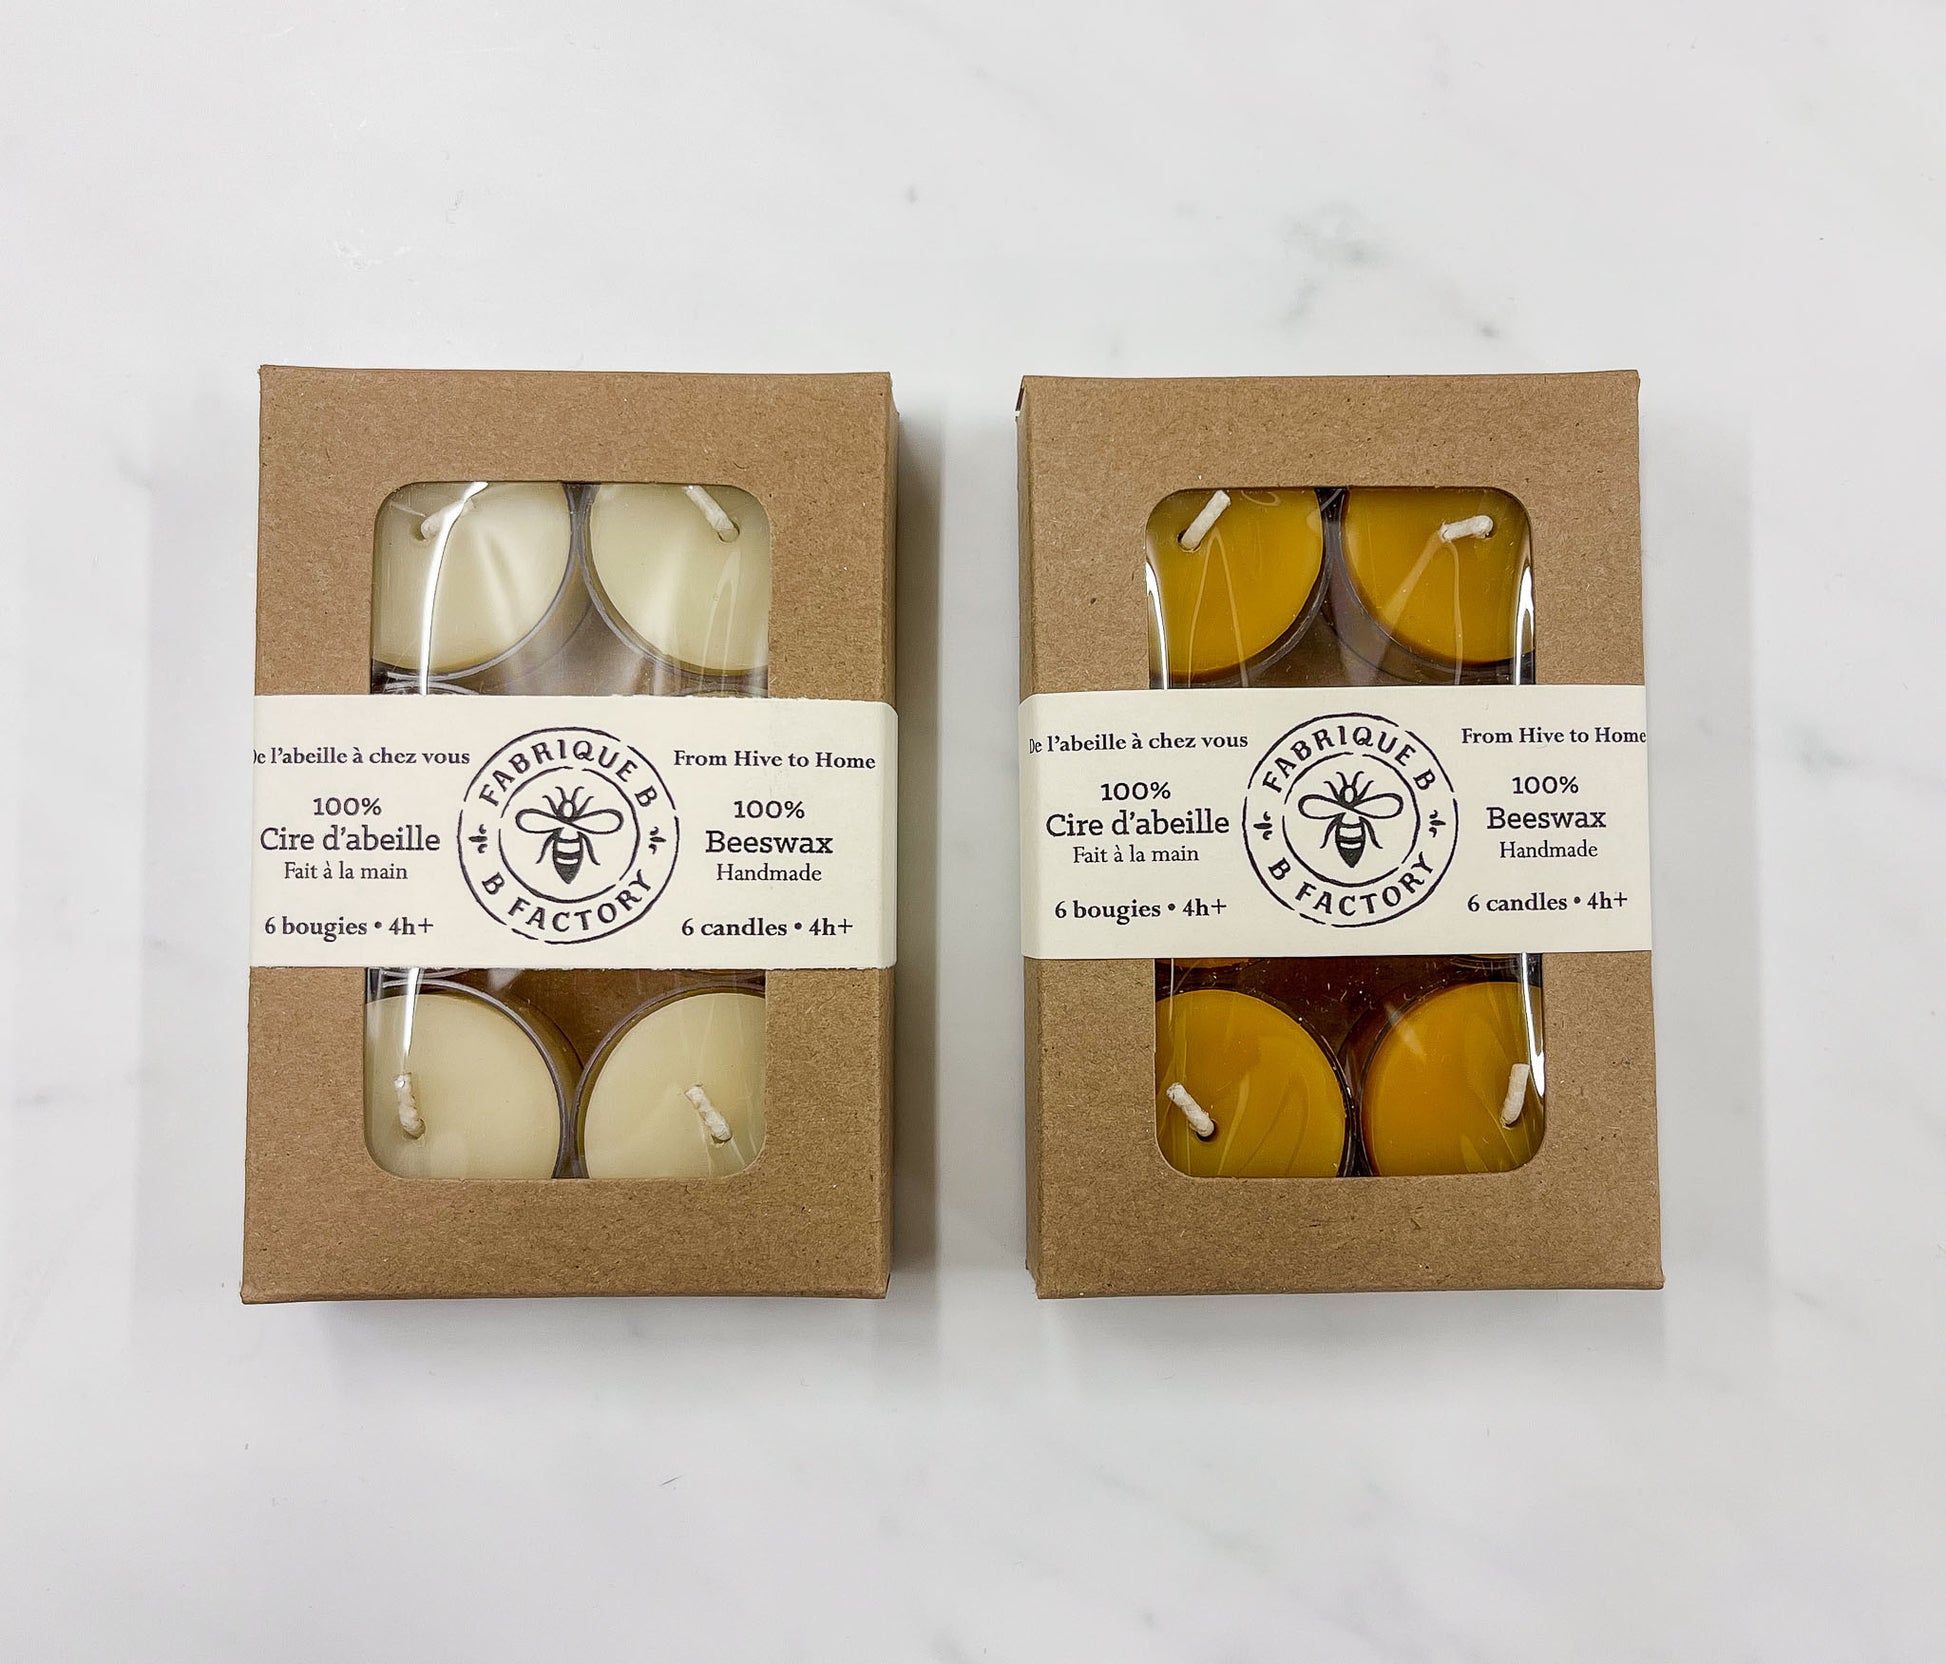 Box of 6 white tea light candles next to box of 6 pure yellow beeswax tea light candles with B Factory logo on lids